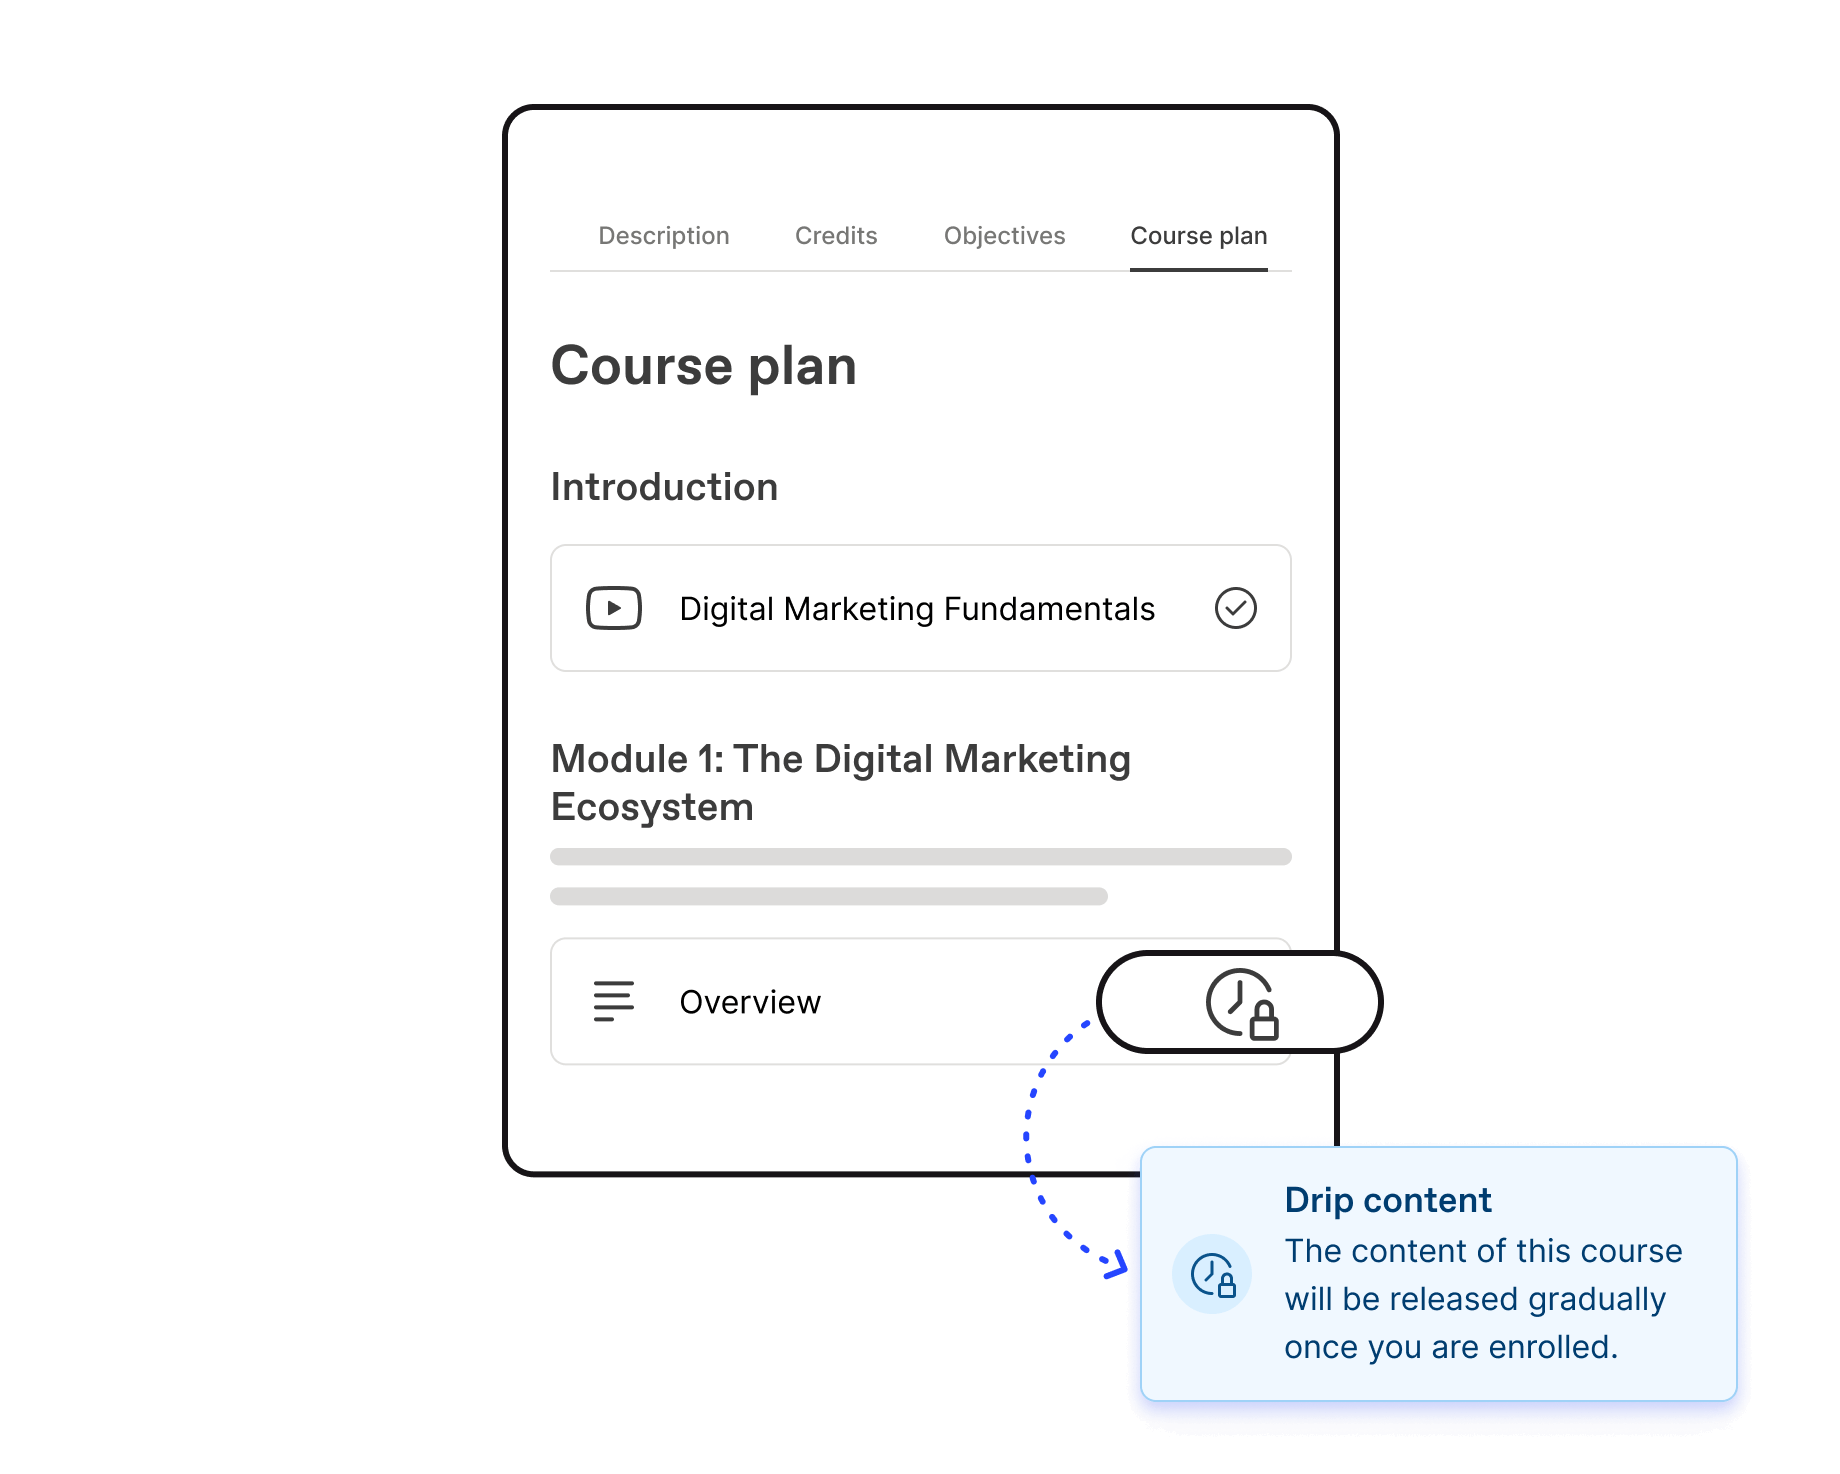 Course plan overview in Workleap LMS showing that drip content is activated, meaning that content will be released gradually.